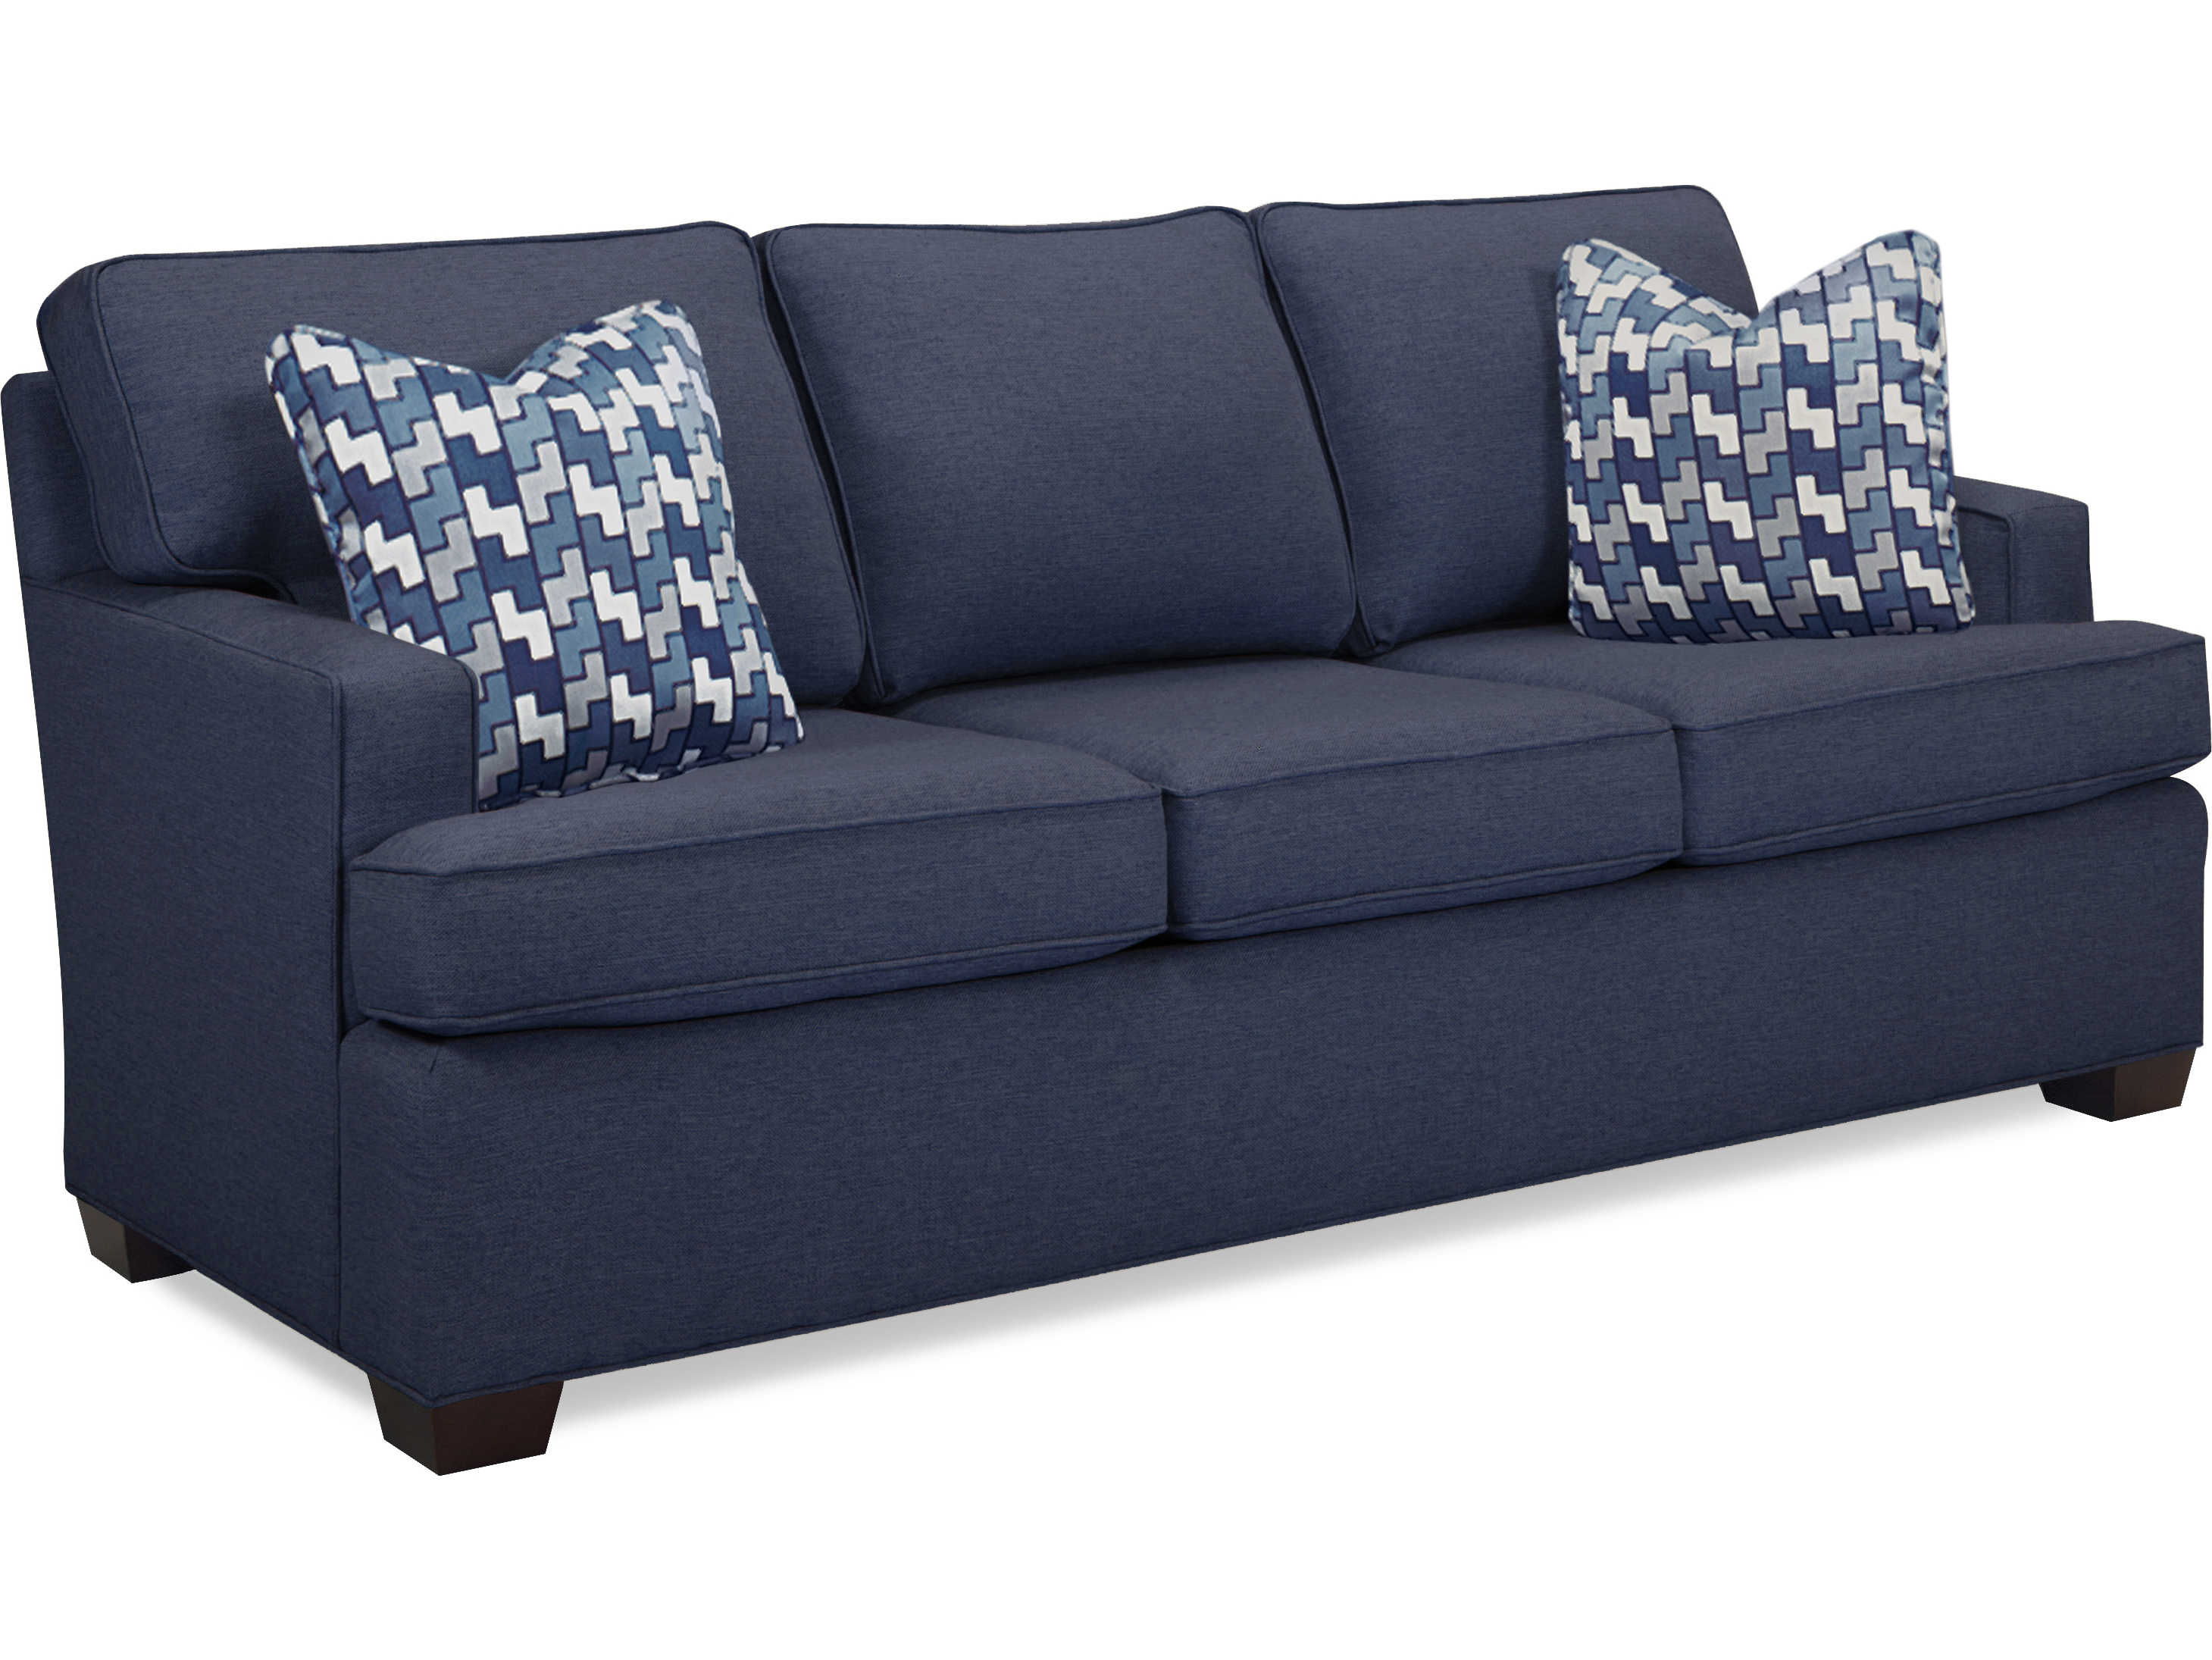 Customize and Personalize Lahaina Queen Fabric Sofa by Savvy | Queen Size  Sofa Bed | SleepersInSeattle.com